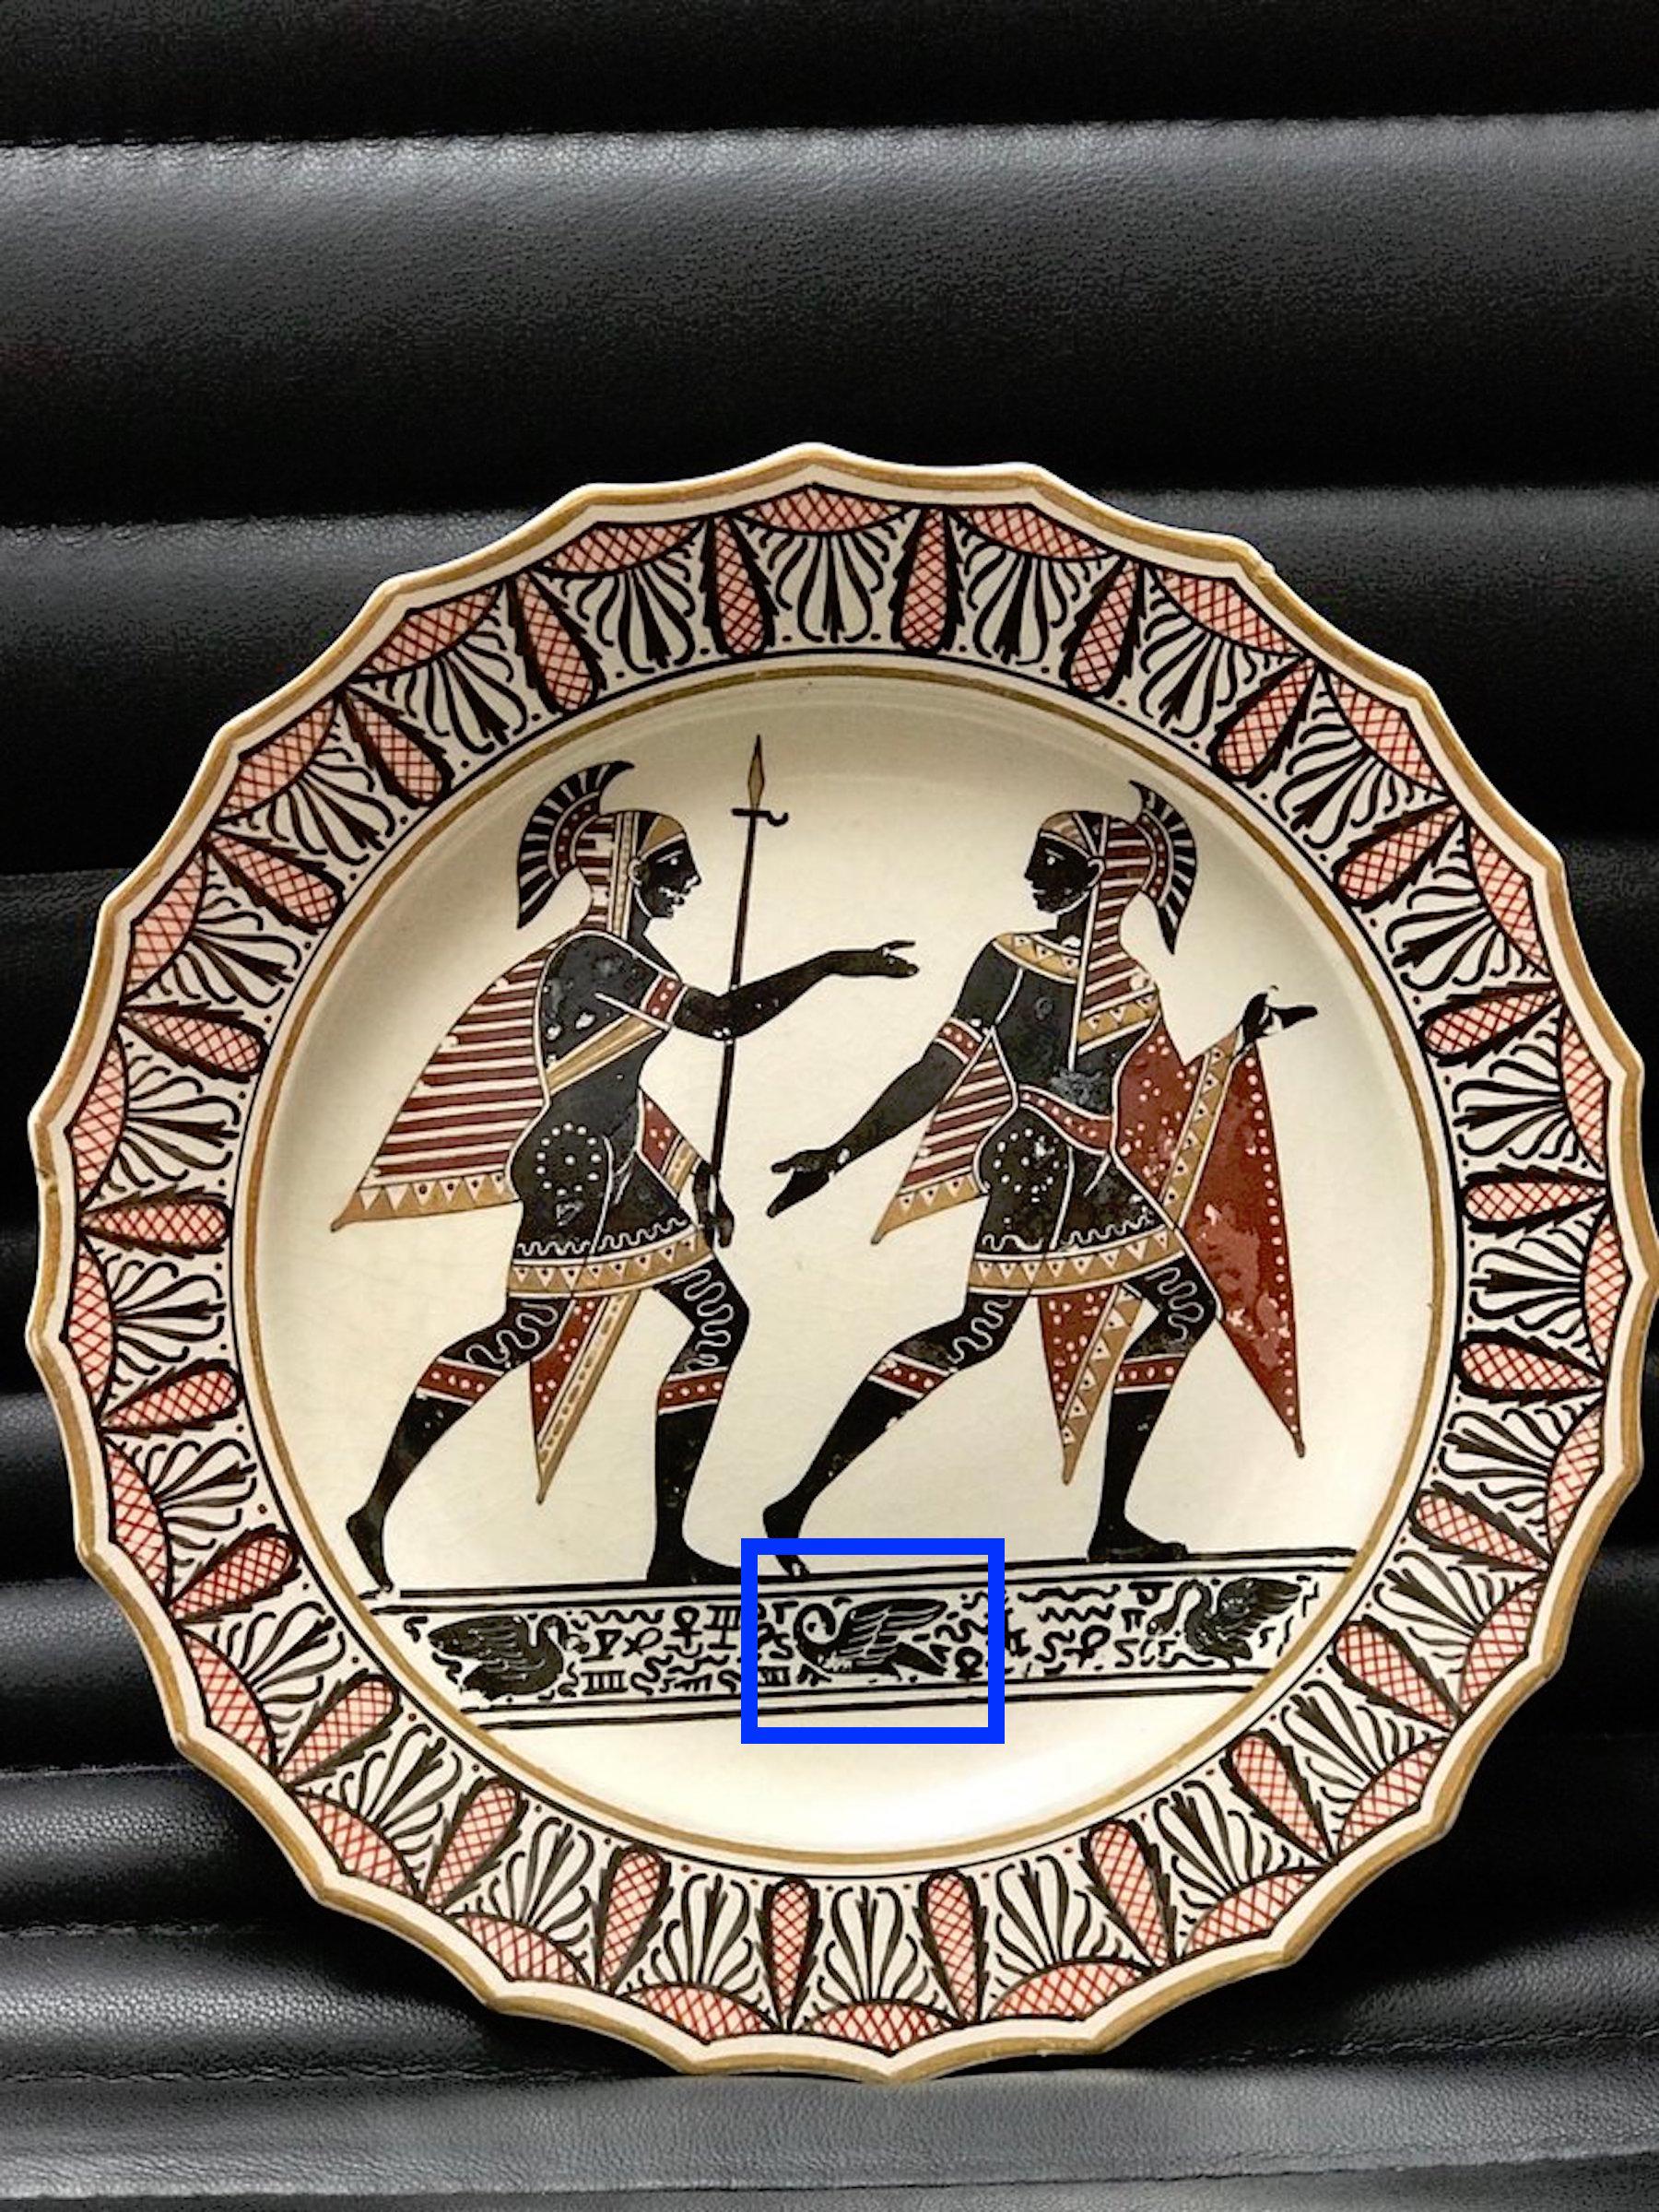 Giustiniani Egyptomania pottery plate with gilt highlights, and a central right facing swan
Neapolitan manufacture (Biagio Giustiniani & Sons) dated to 1830-1840, impressed script G.